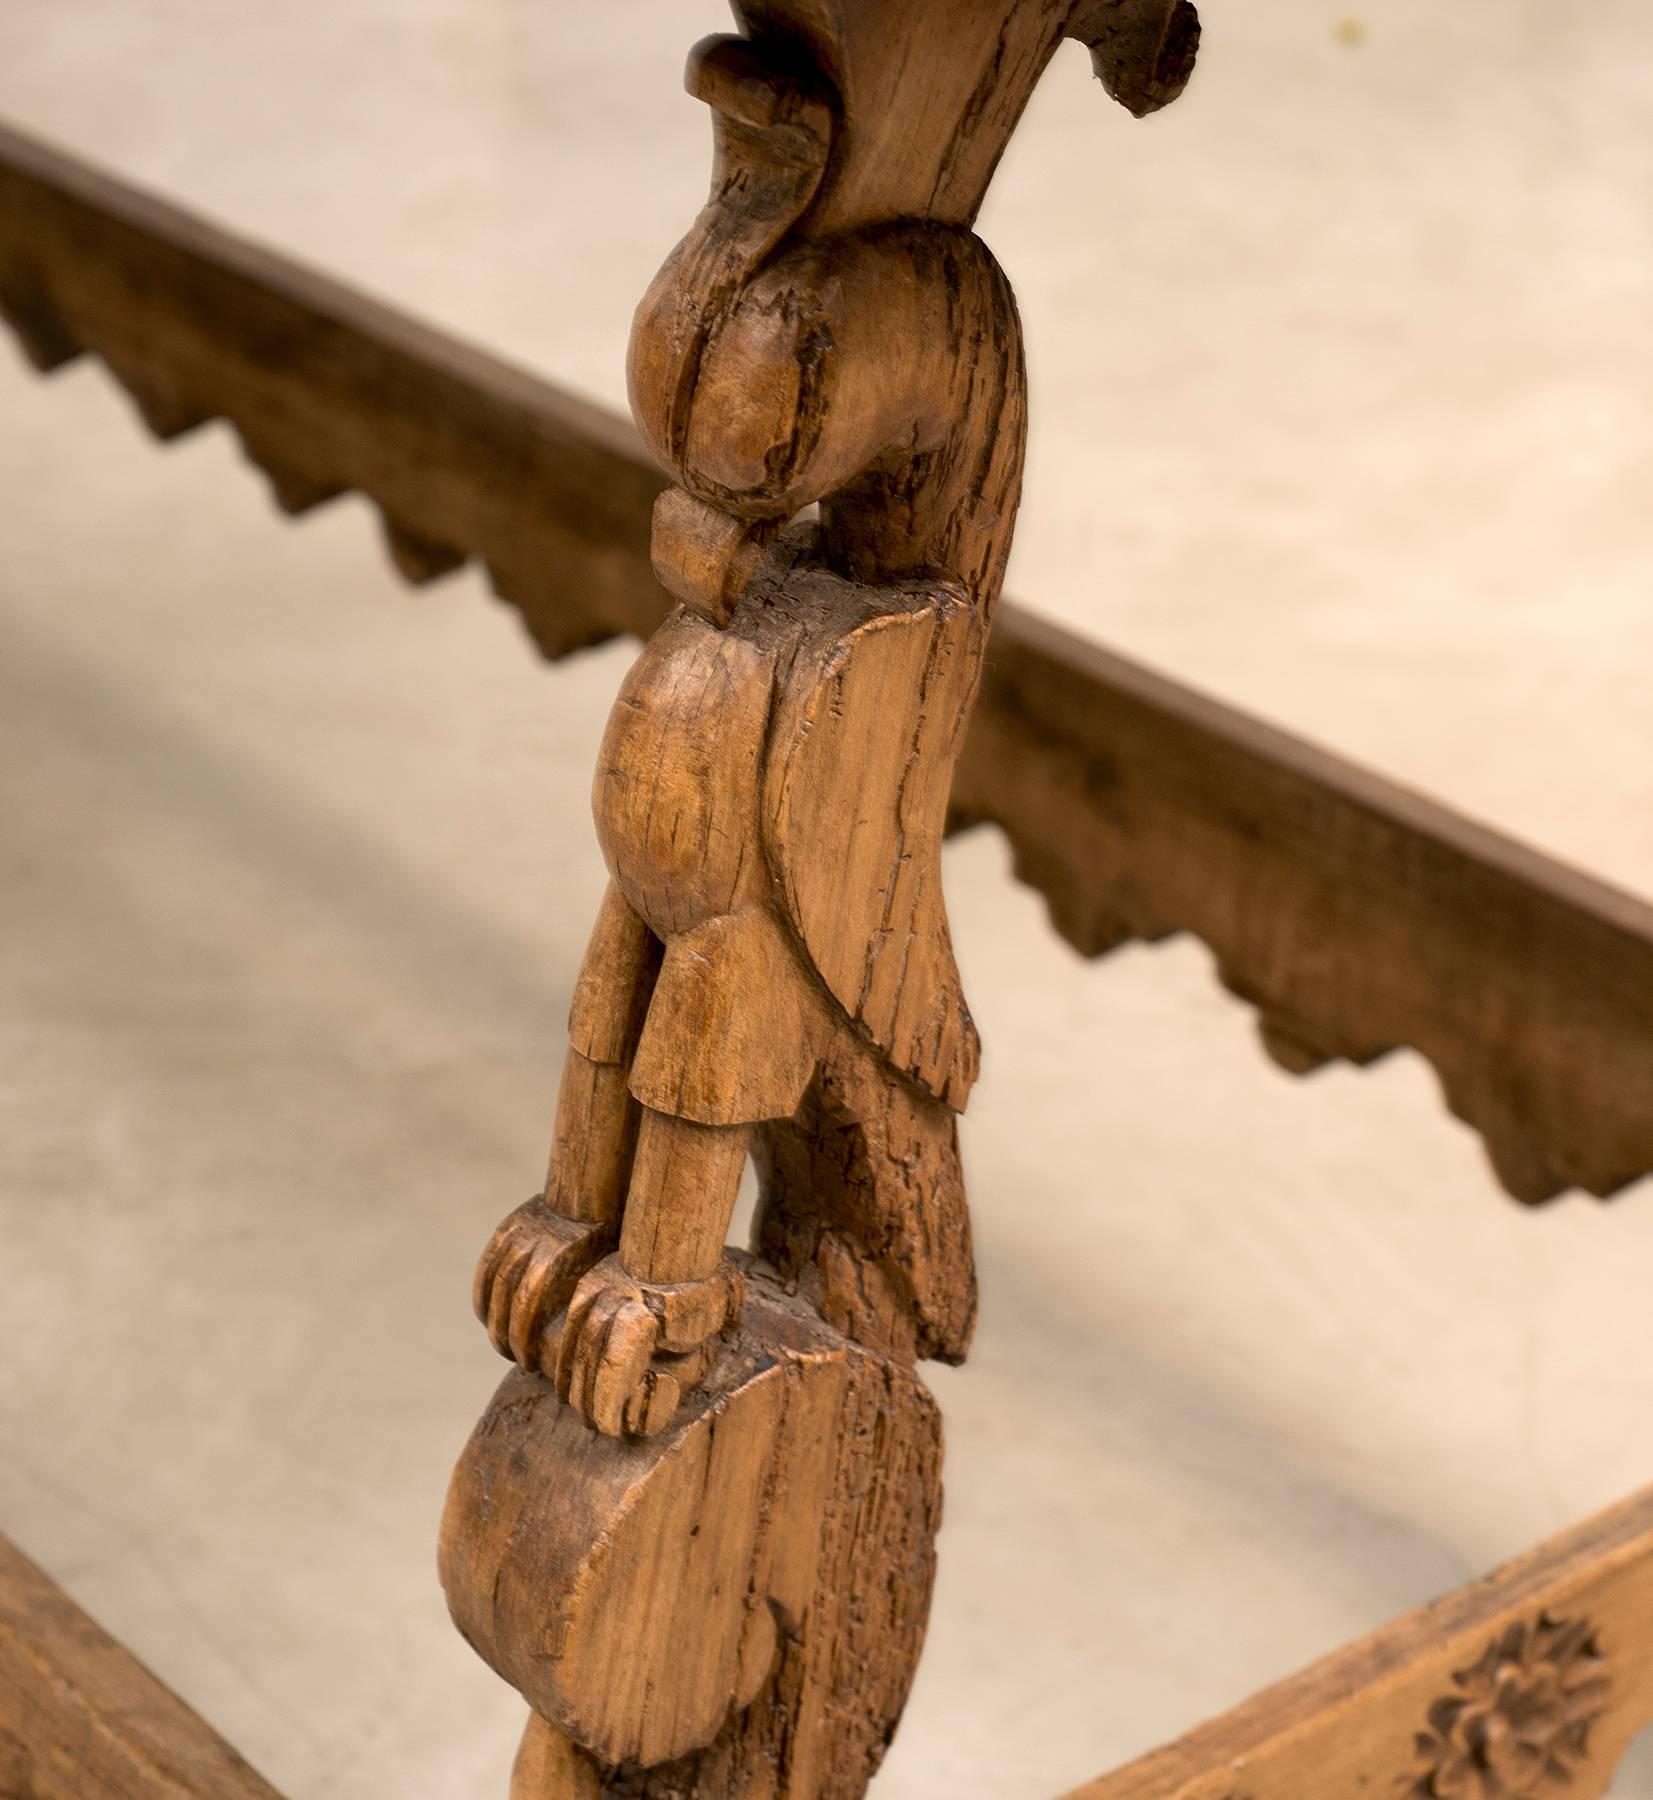 Carved Spanish Colonial Mexican Stretcher Base Table, Early 1700s